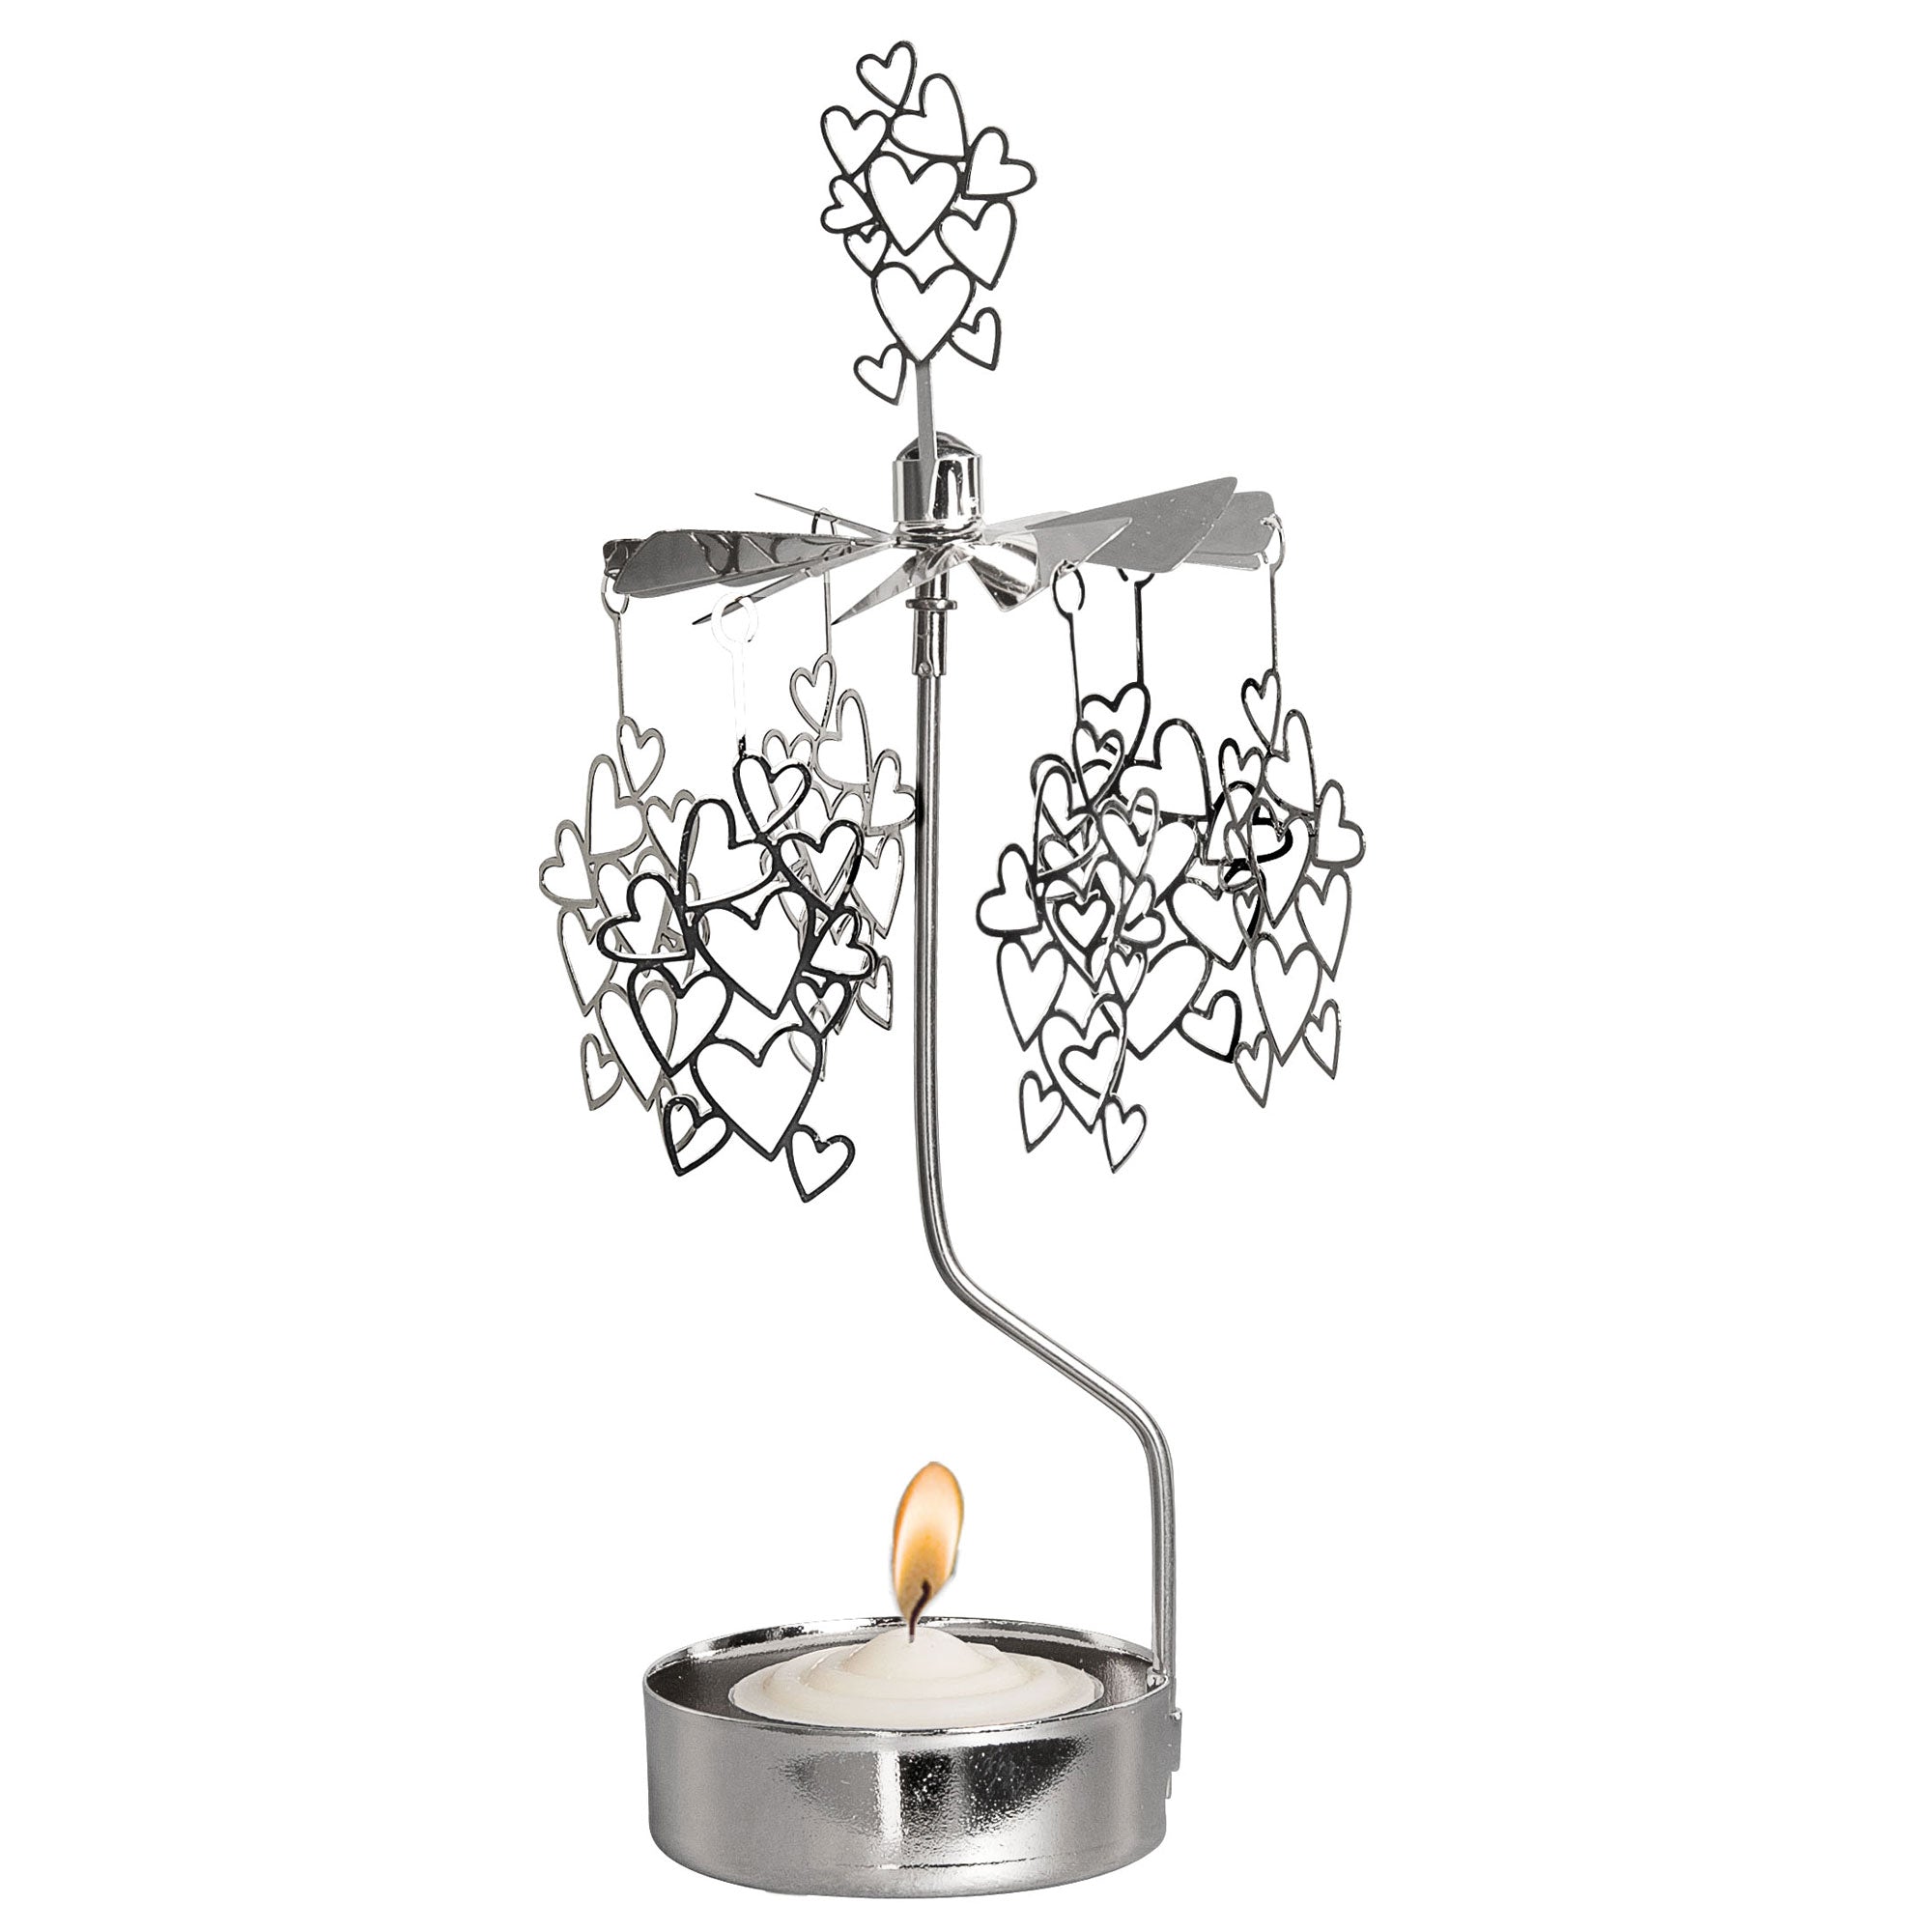 Small Hearts Rotary Candle Holder - Northlight Homestore